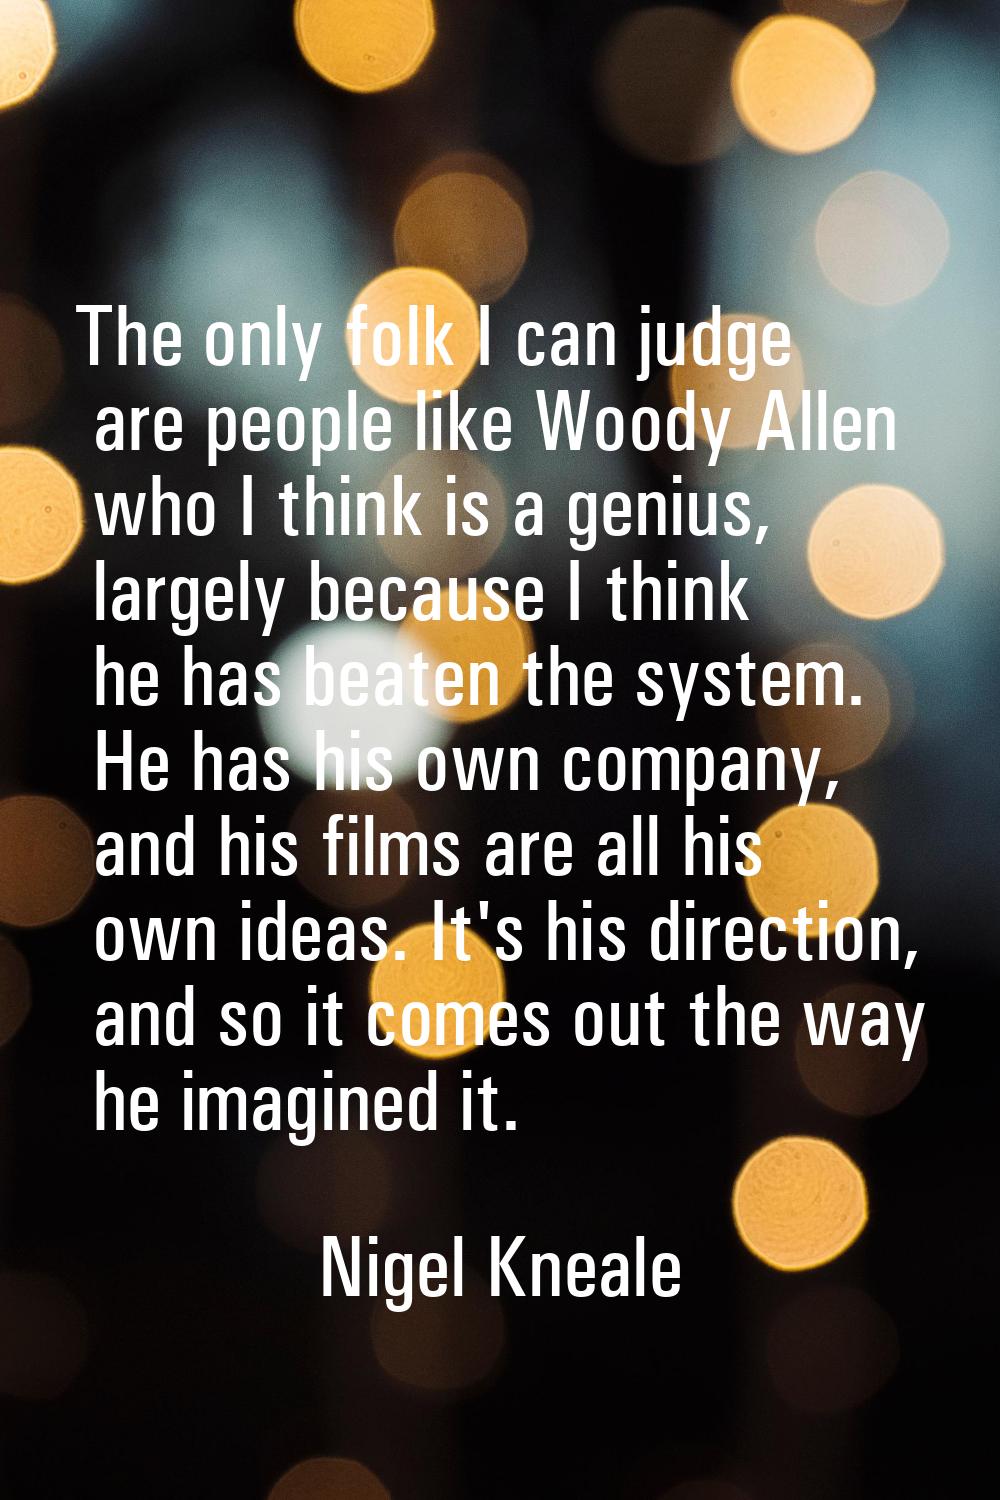 The only folk I can judge are people like Woody Allen who I think is a genius, largely because I th